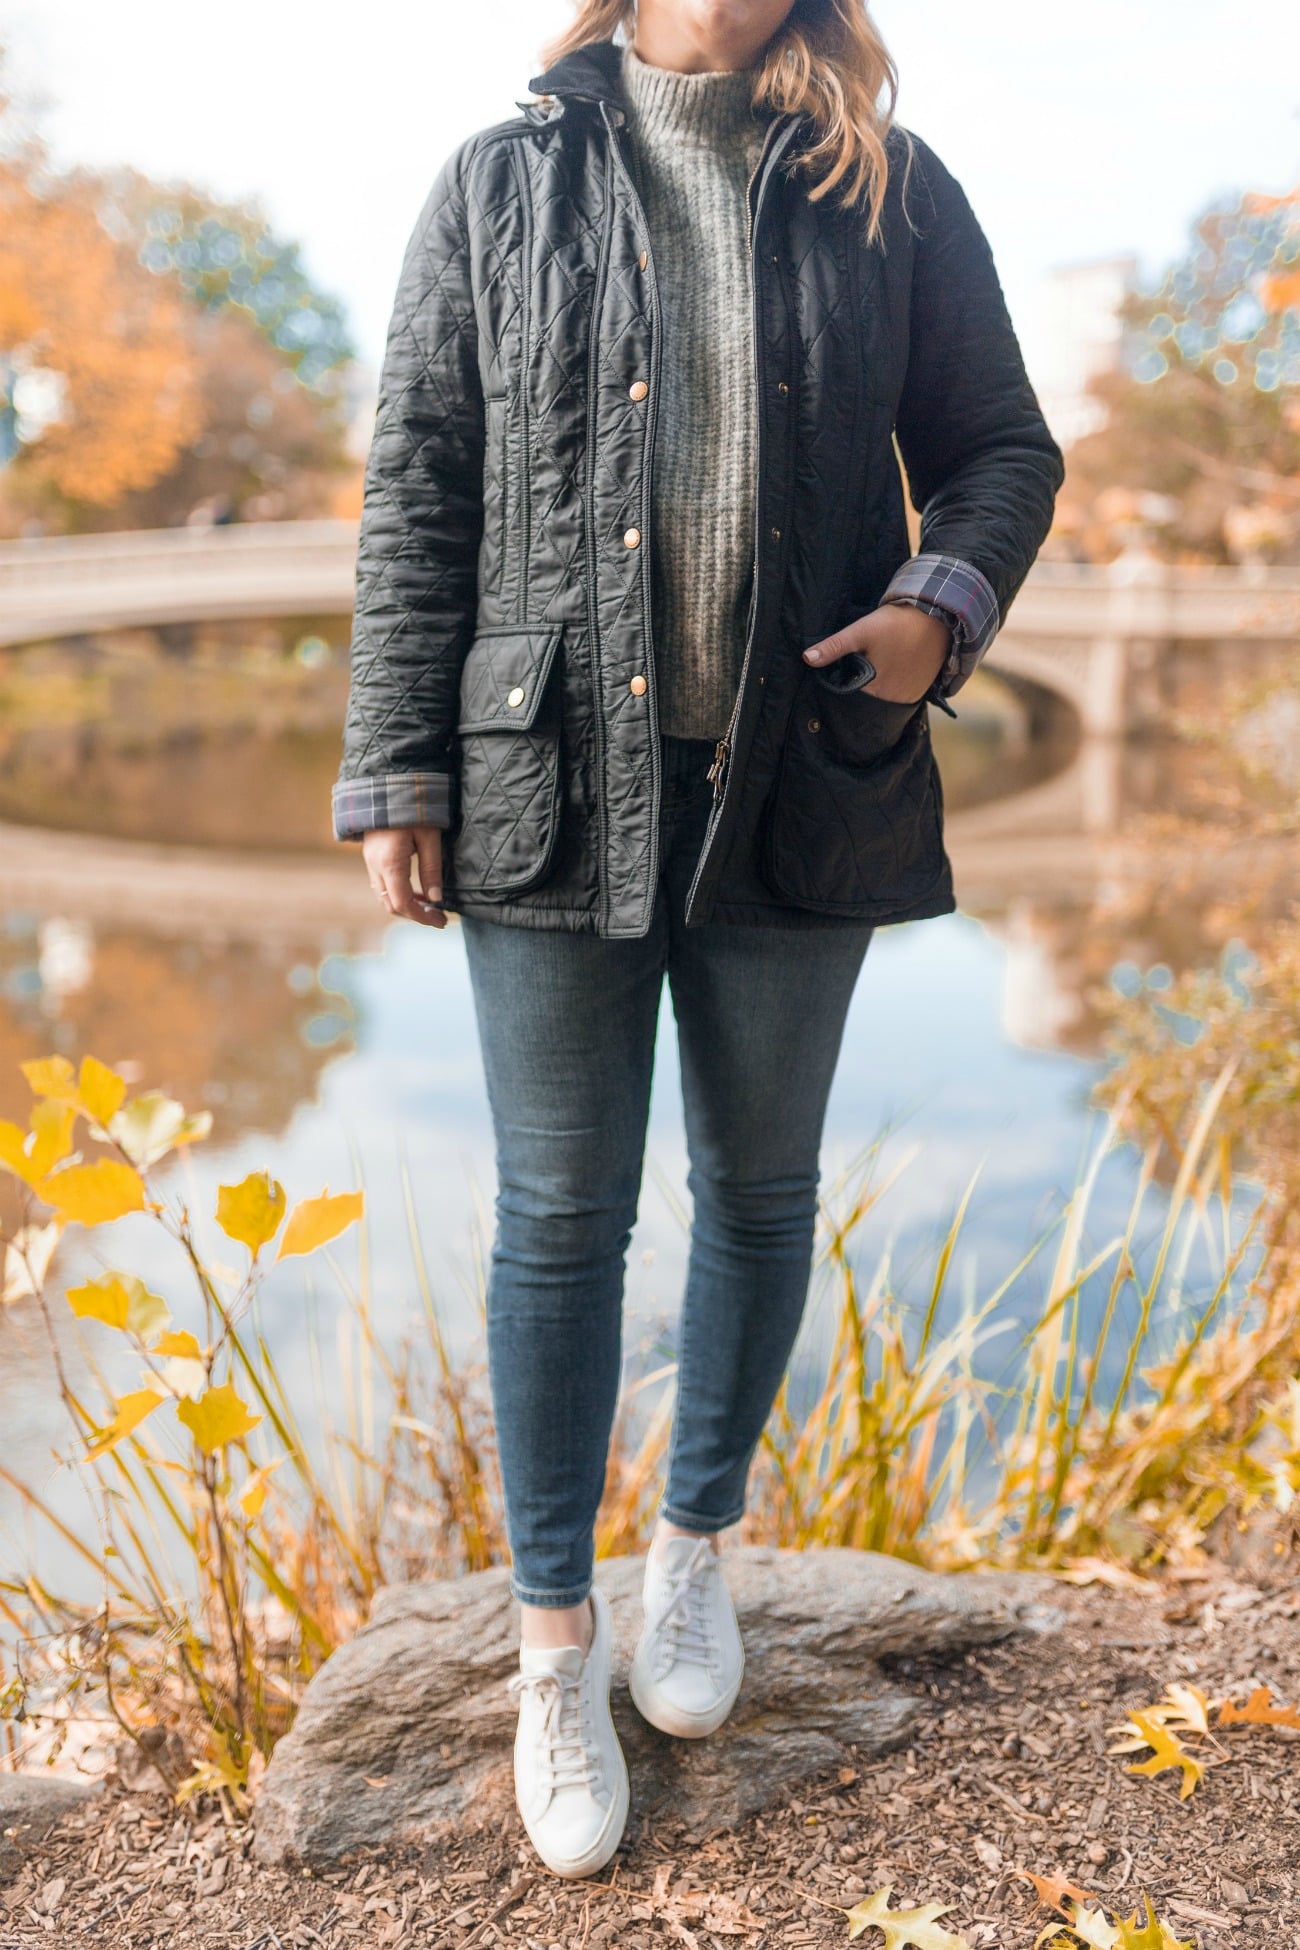 Barbour Quilted Jacket | What to Buy From The ShopBop Sale